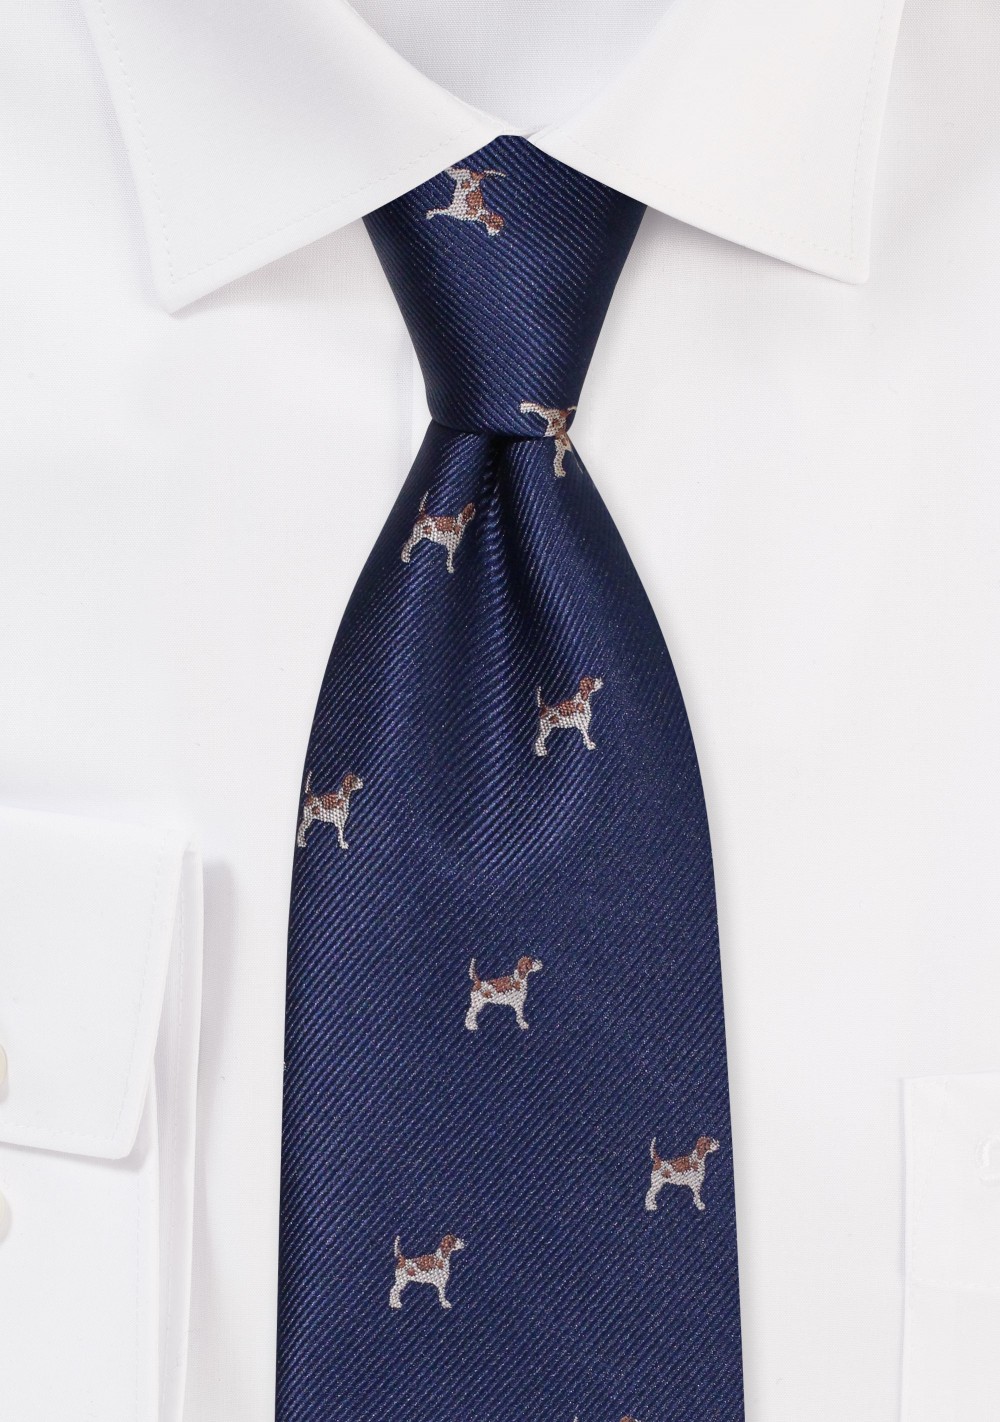 XL Tie in Navy with Beagles